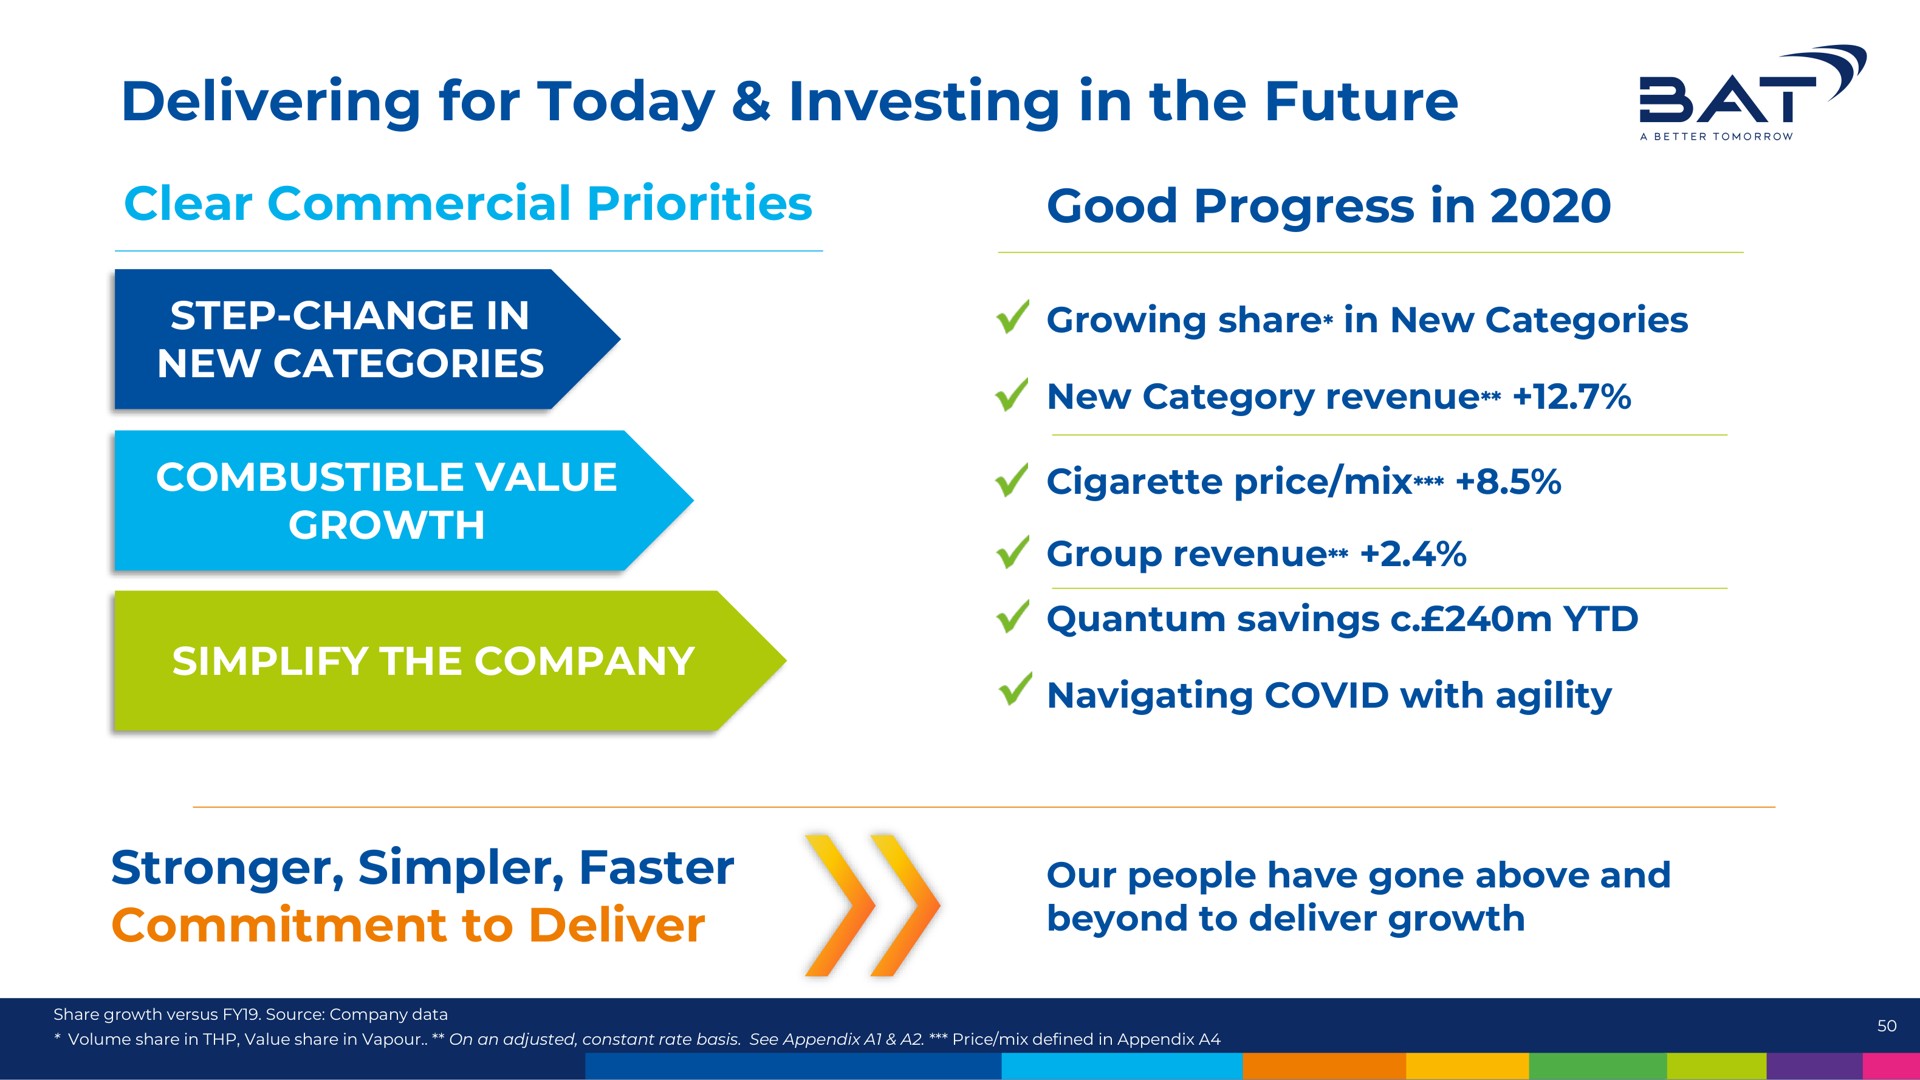 delivering for today investing in the future at commitment to deliver beyond to deliver growth | BAT